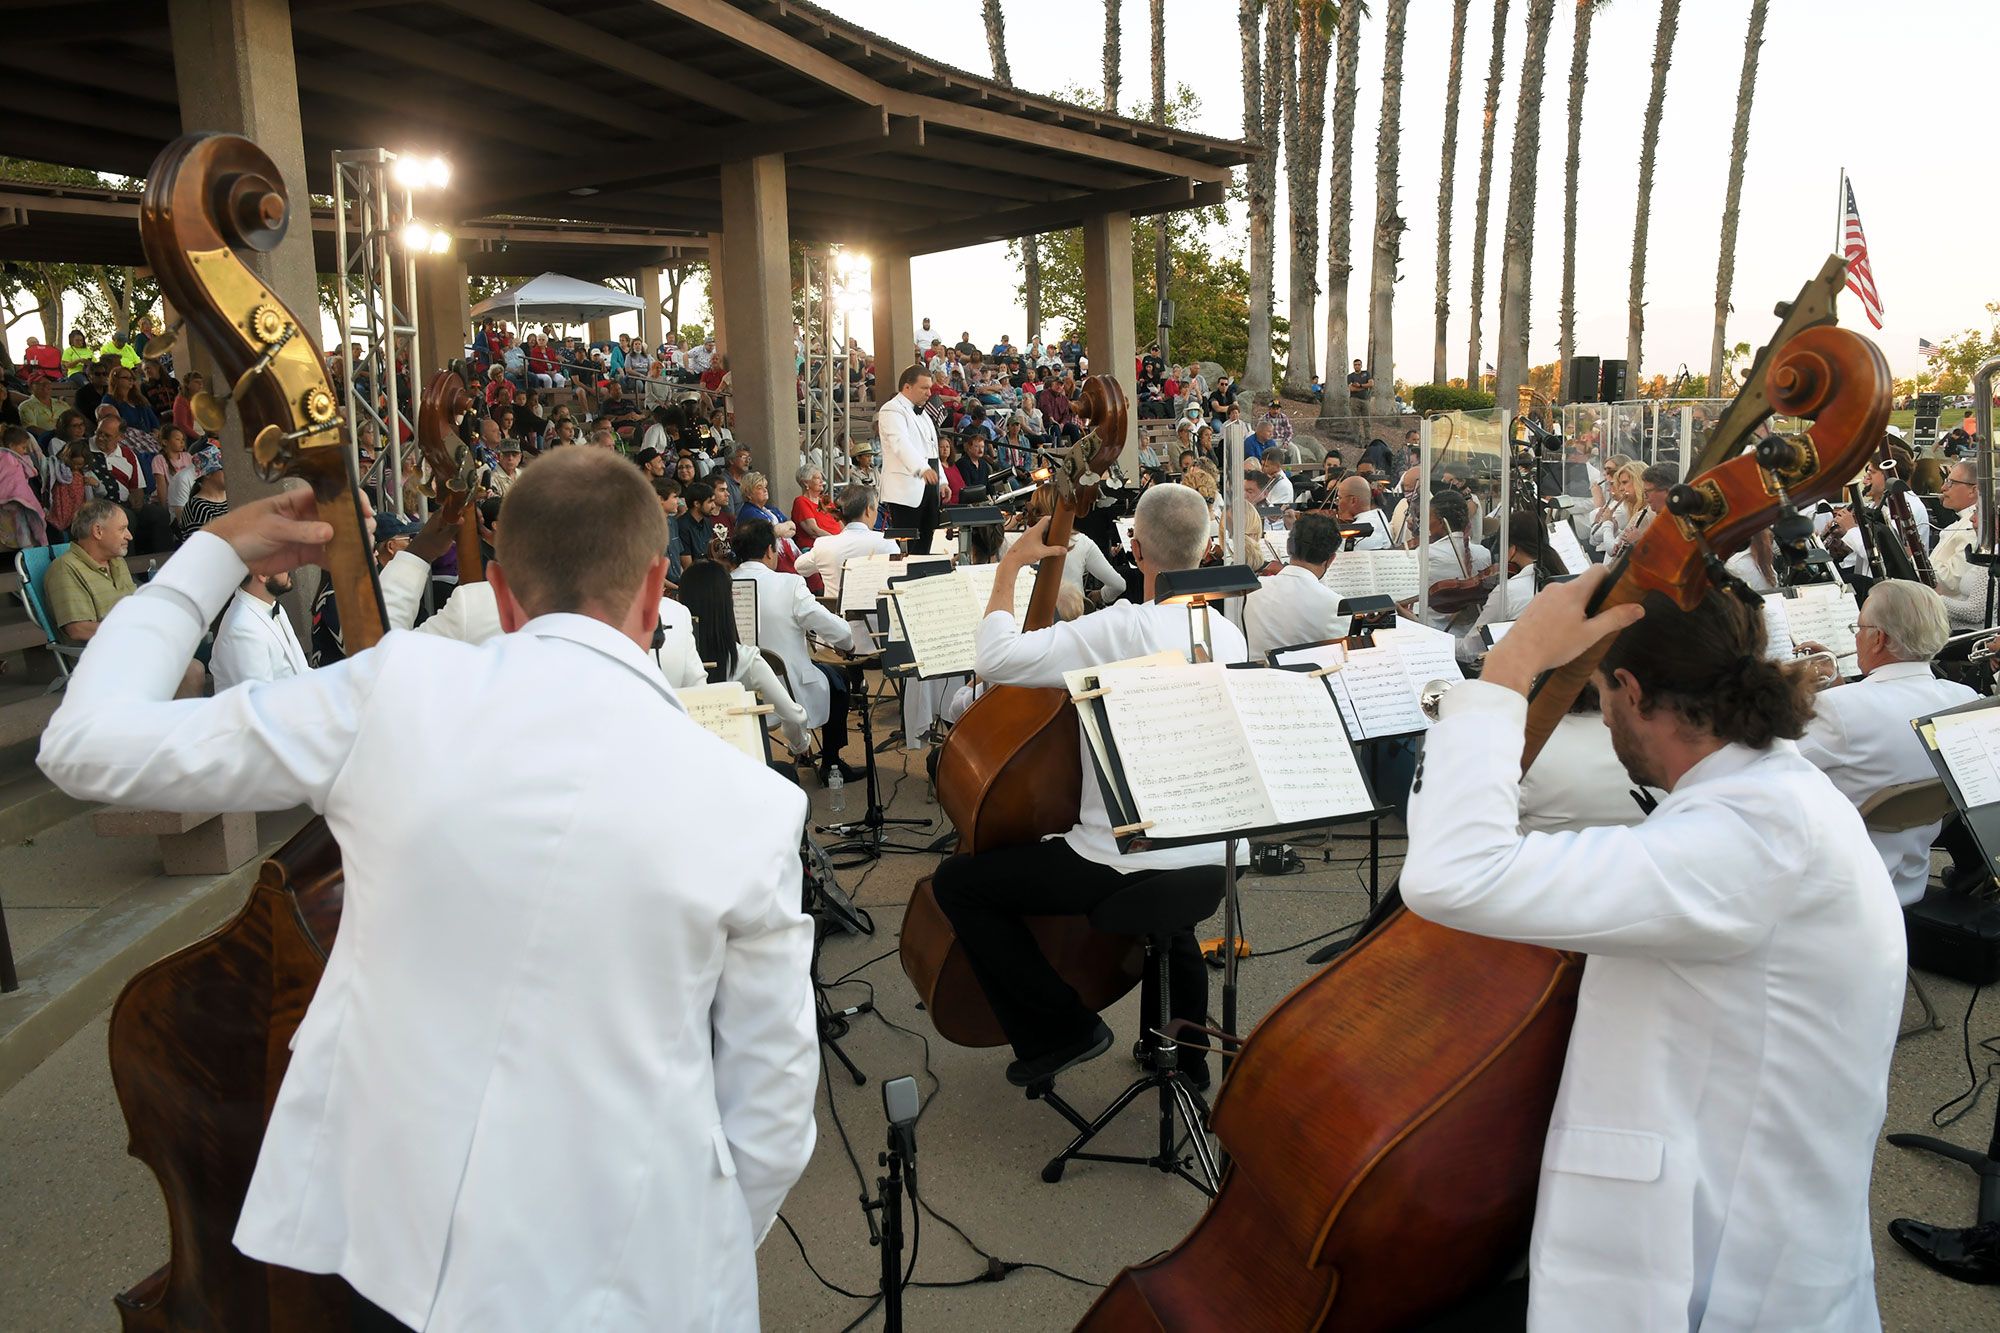 Riverside Philharmonic Orchestra to Honor Veterans with Annual "Concert